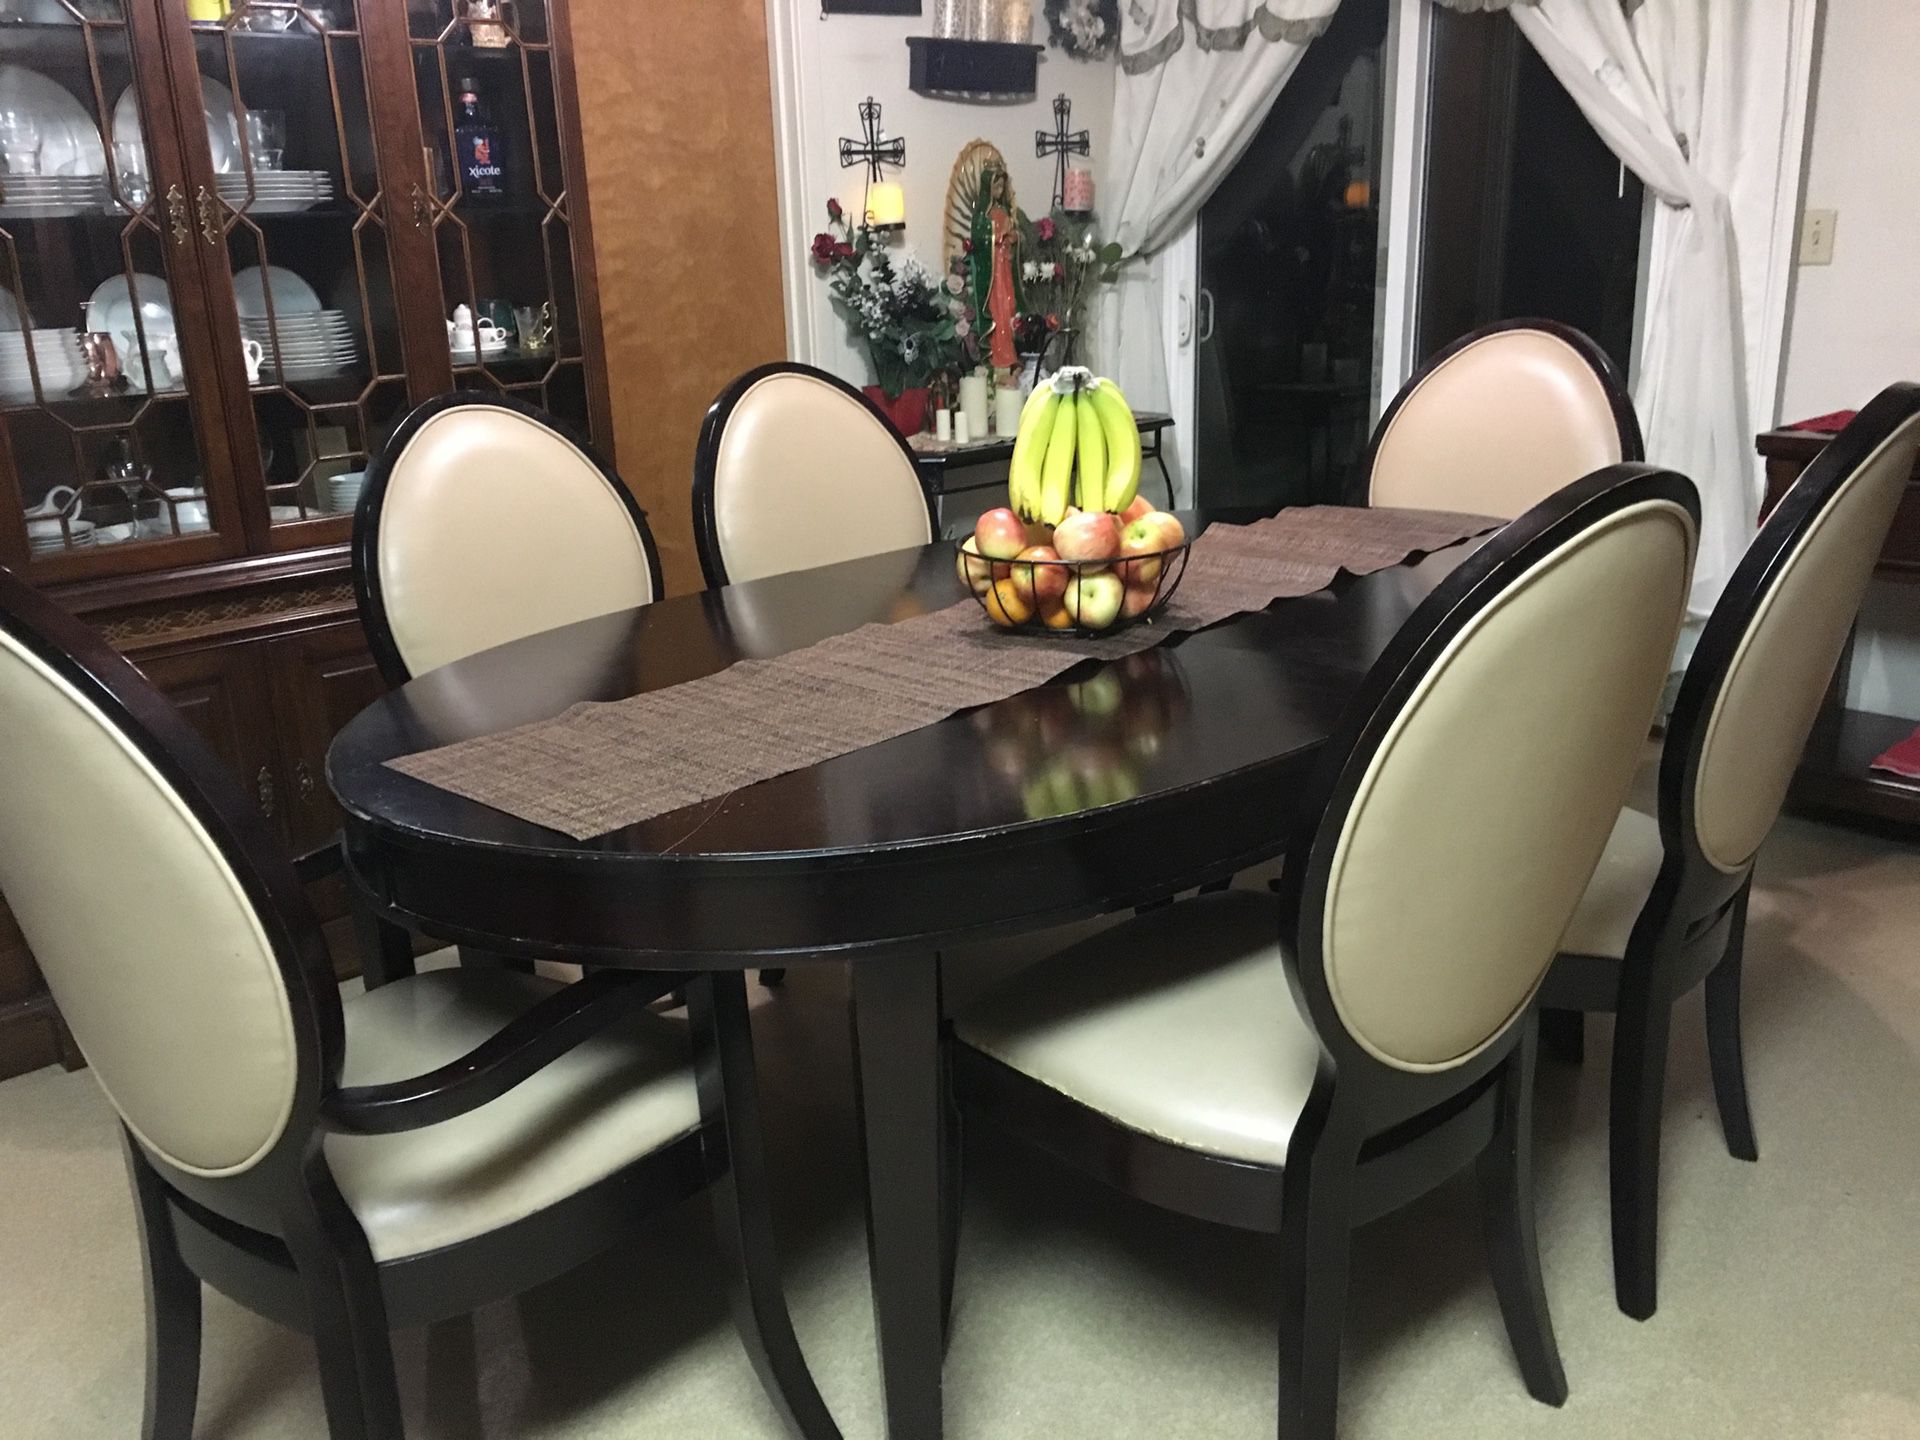 Kitchen table with 6 chairs with Extension